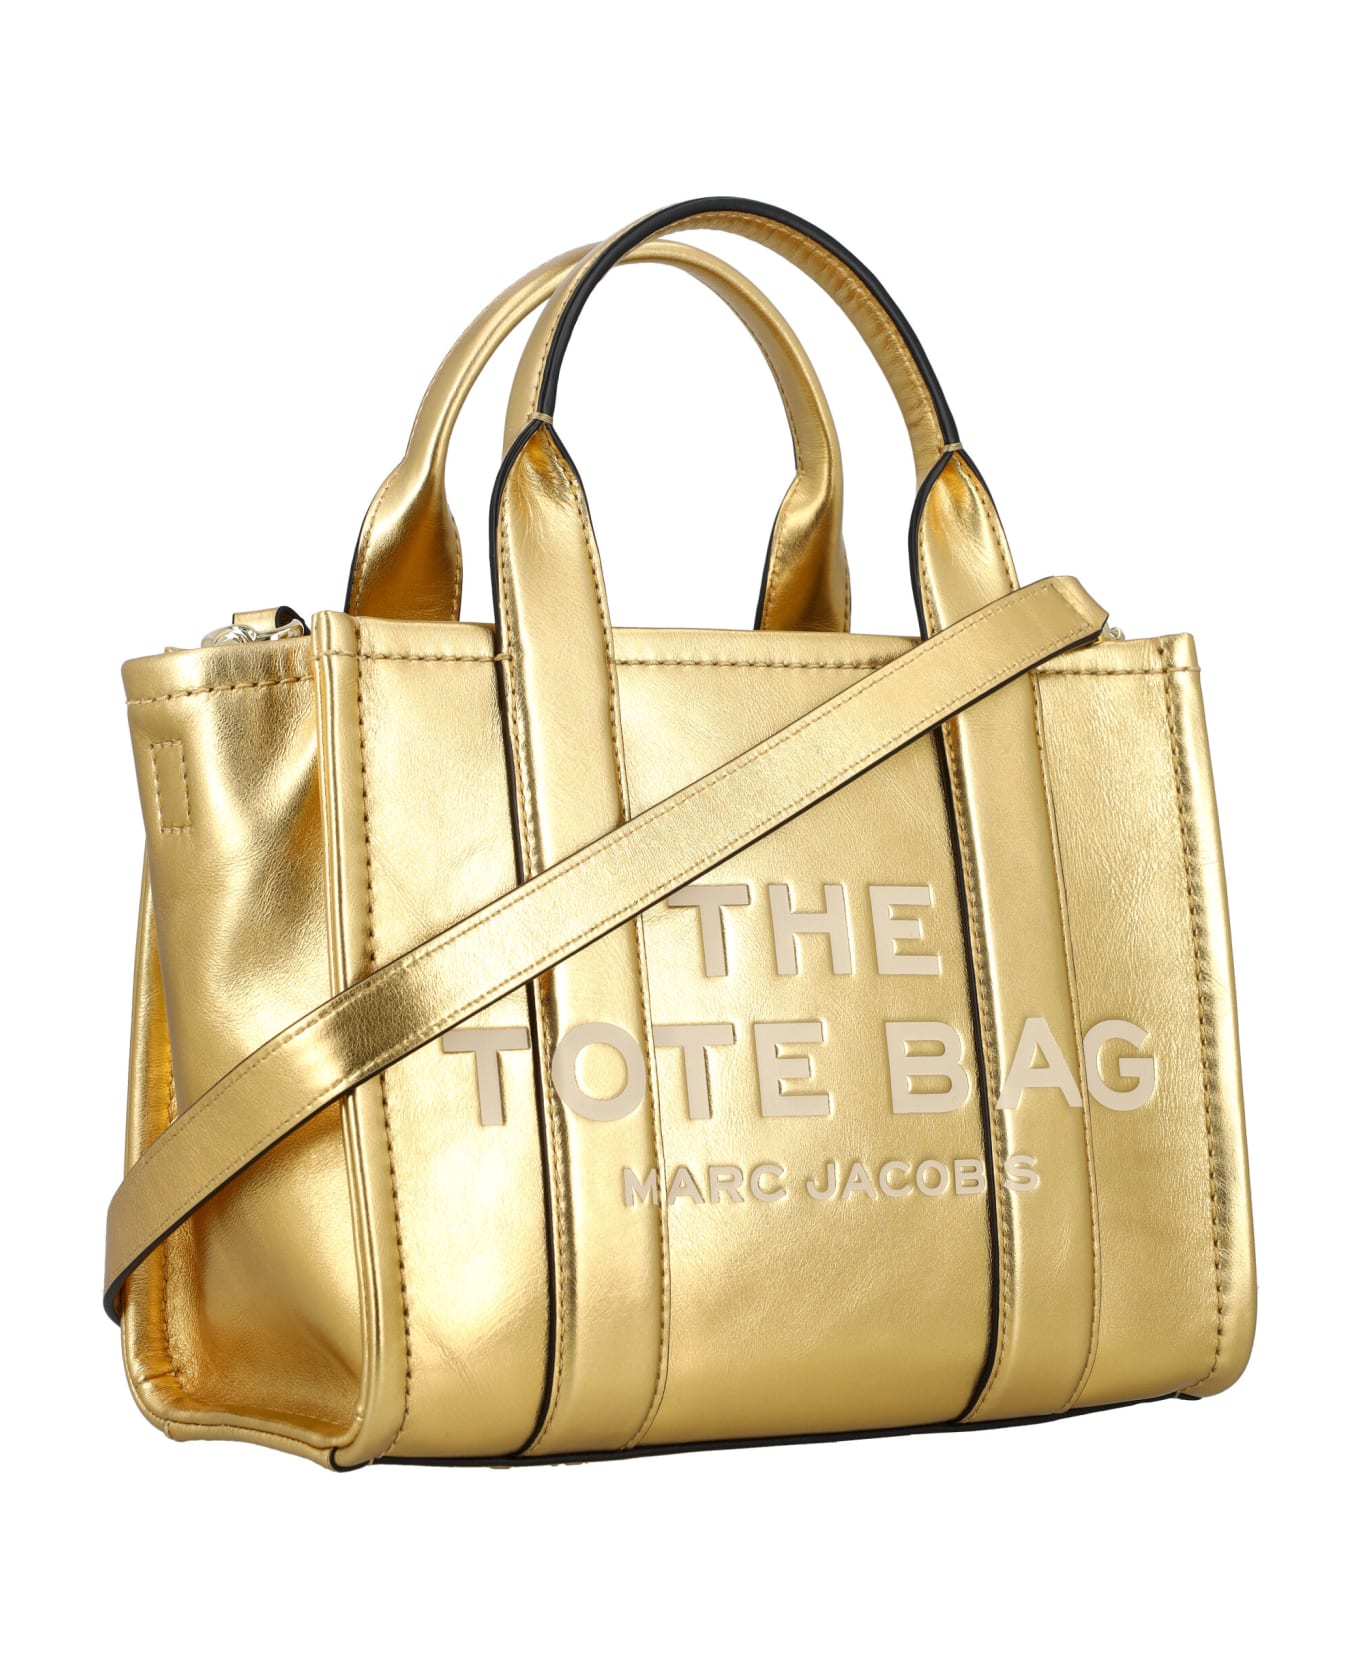 Marc Jacobs The Small Tote Bag Metallic - GOLD